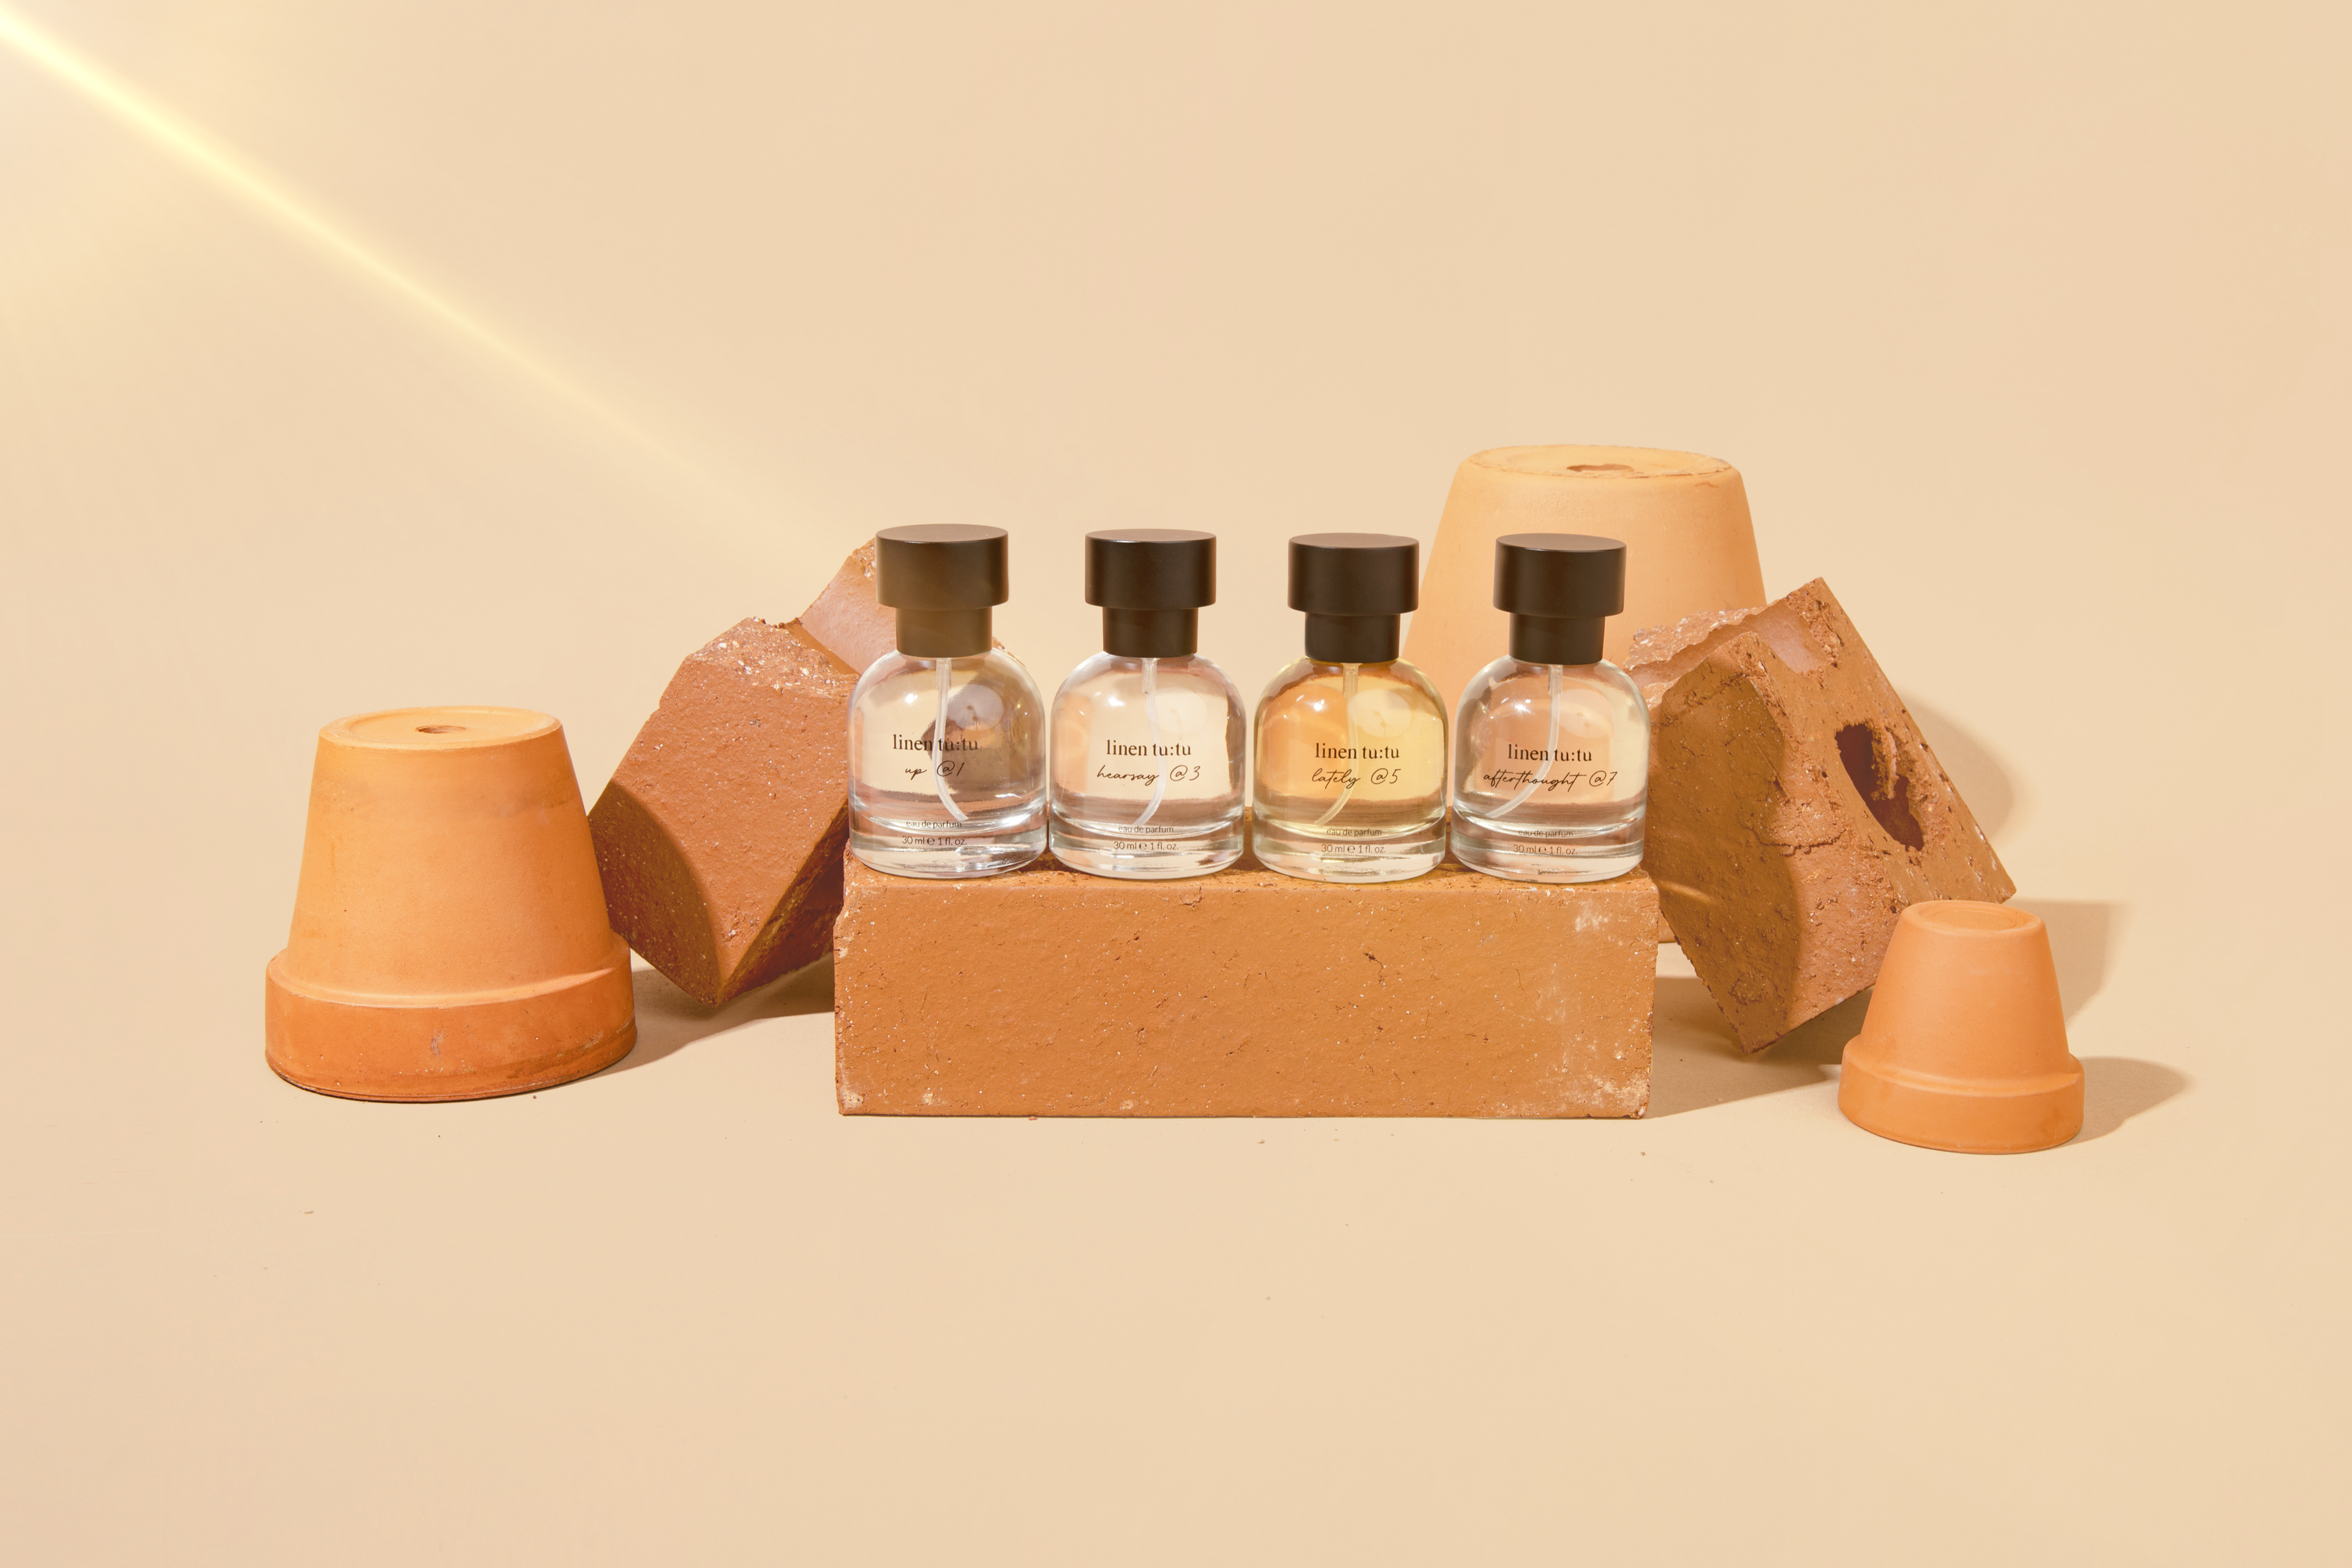 Four Linen Tutu fragrances in line on top of a terracotta brick, surrounded by terracotta pots